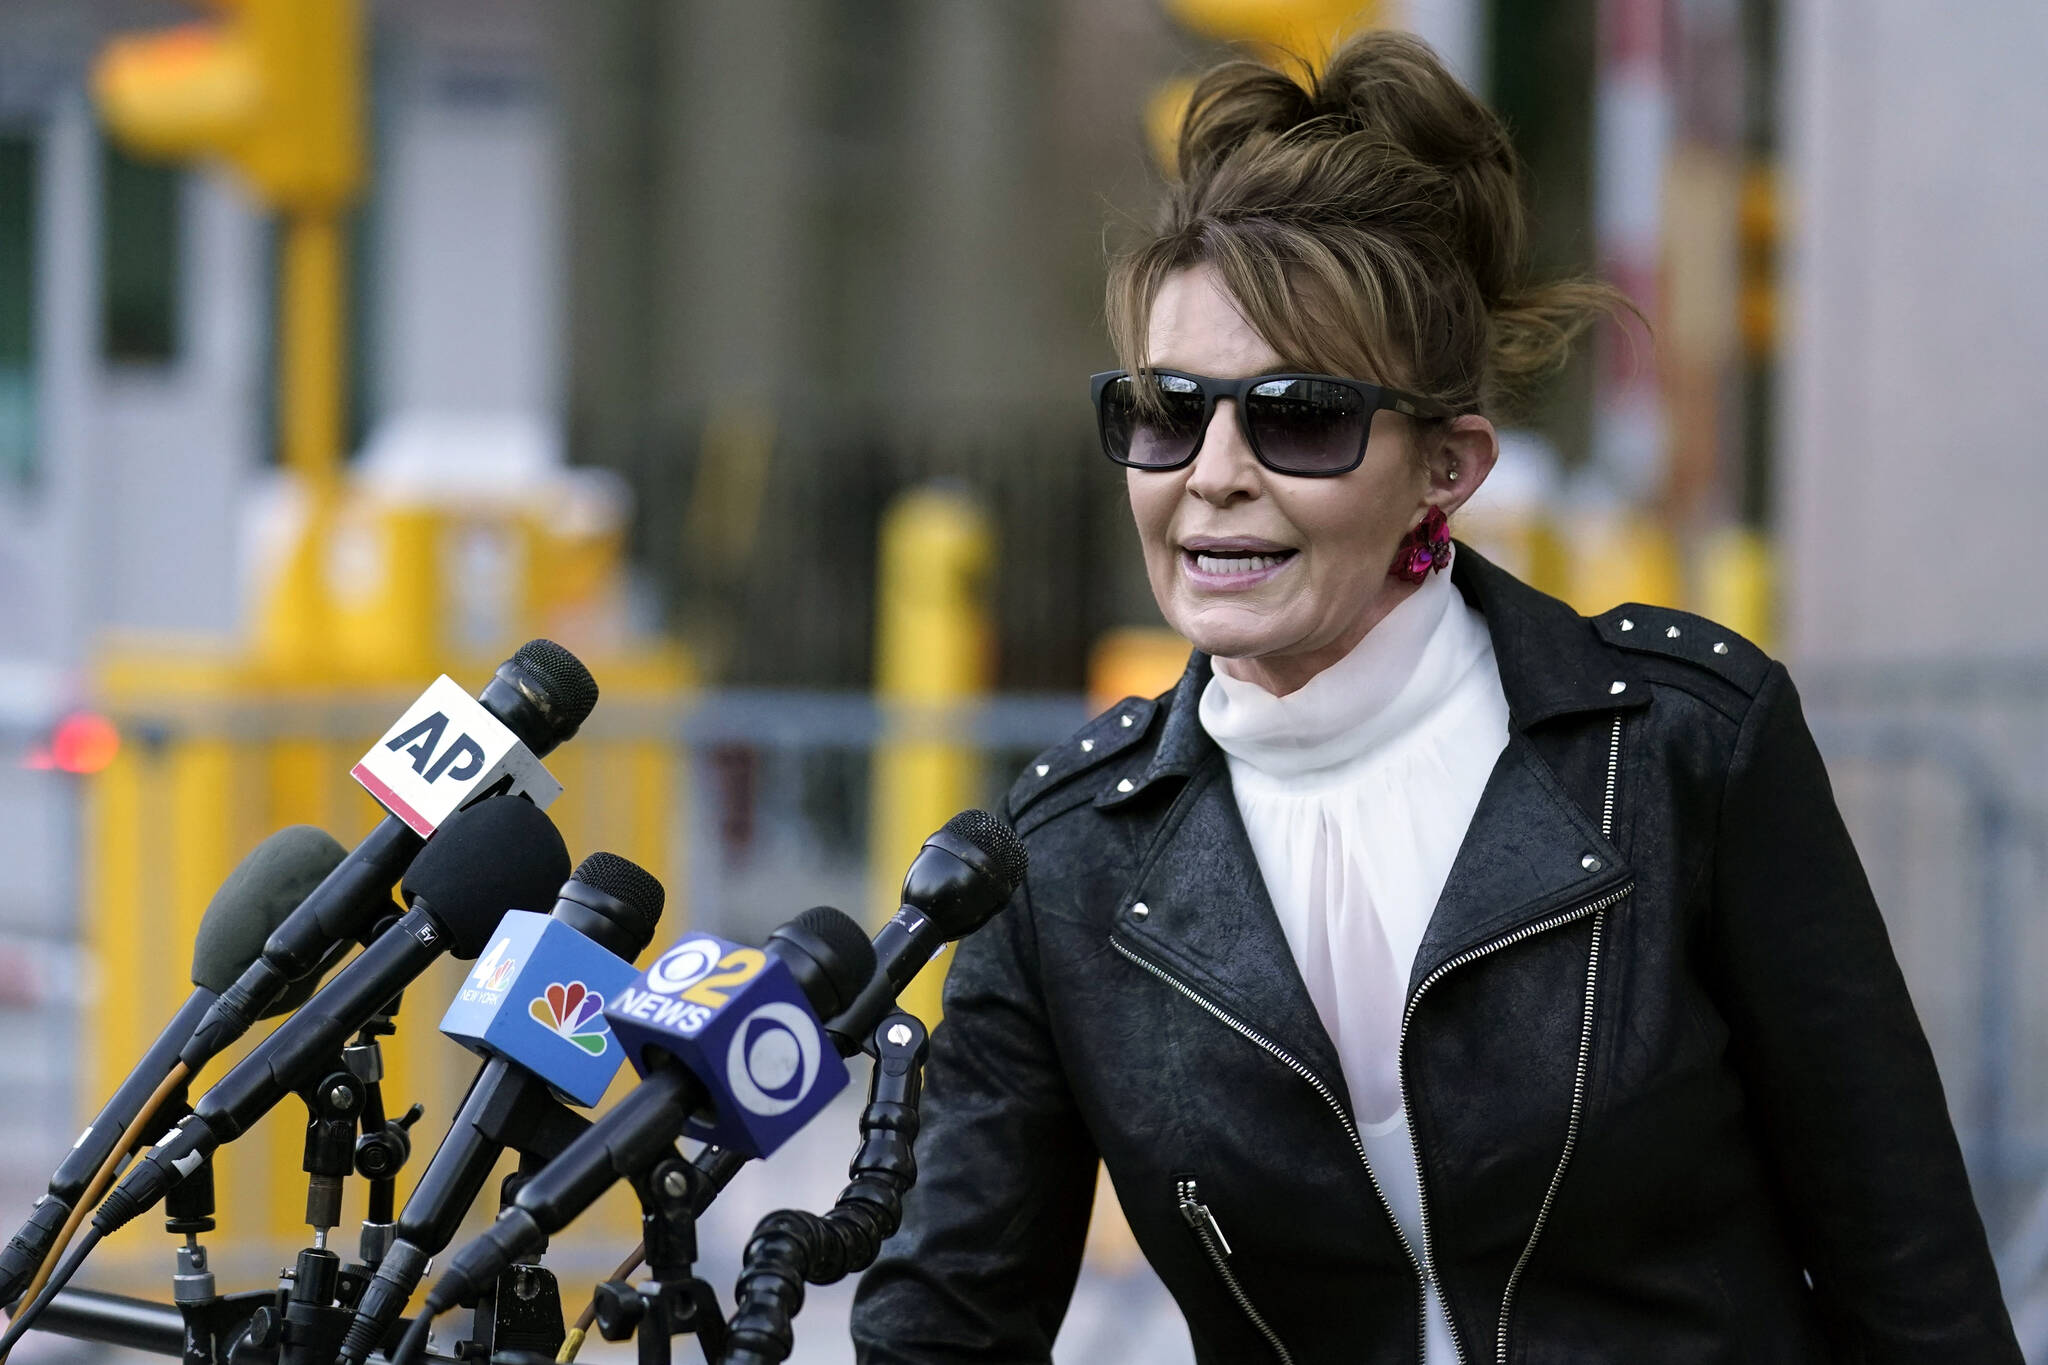 Former Alaska Gov. Sarah Palin speaks briefly to reporters as she leaves a courthouse in New York, Feb. 14, 2022. Palin is one of 48 candidates for Alaska’s lone U.S. House seat, which was held for decades by Republican Rep. Don Young, who died last month. Palin says she’s serious about the run though some critics have questioned her motivations. (AP Photo/Seth Wenig, File)